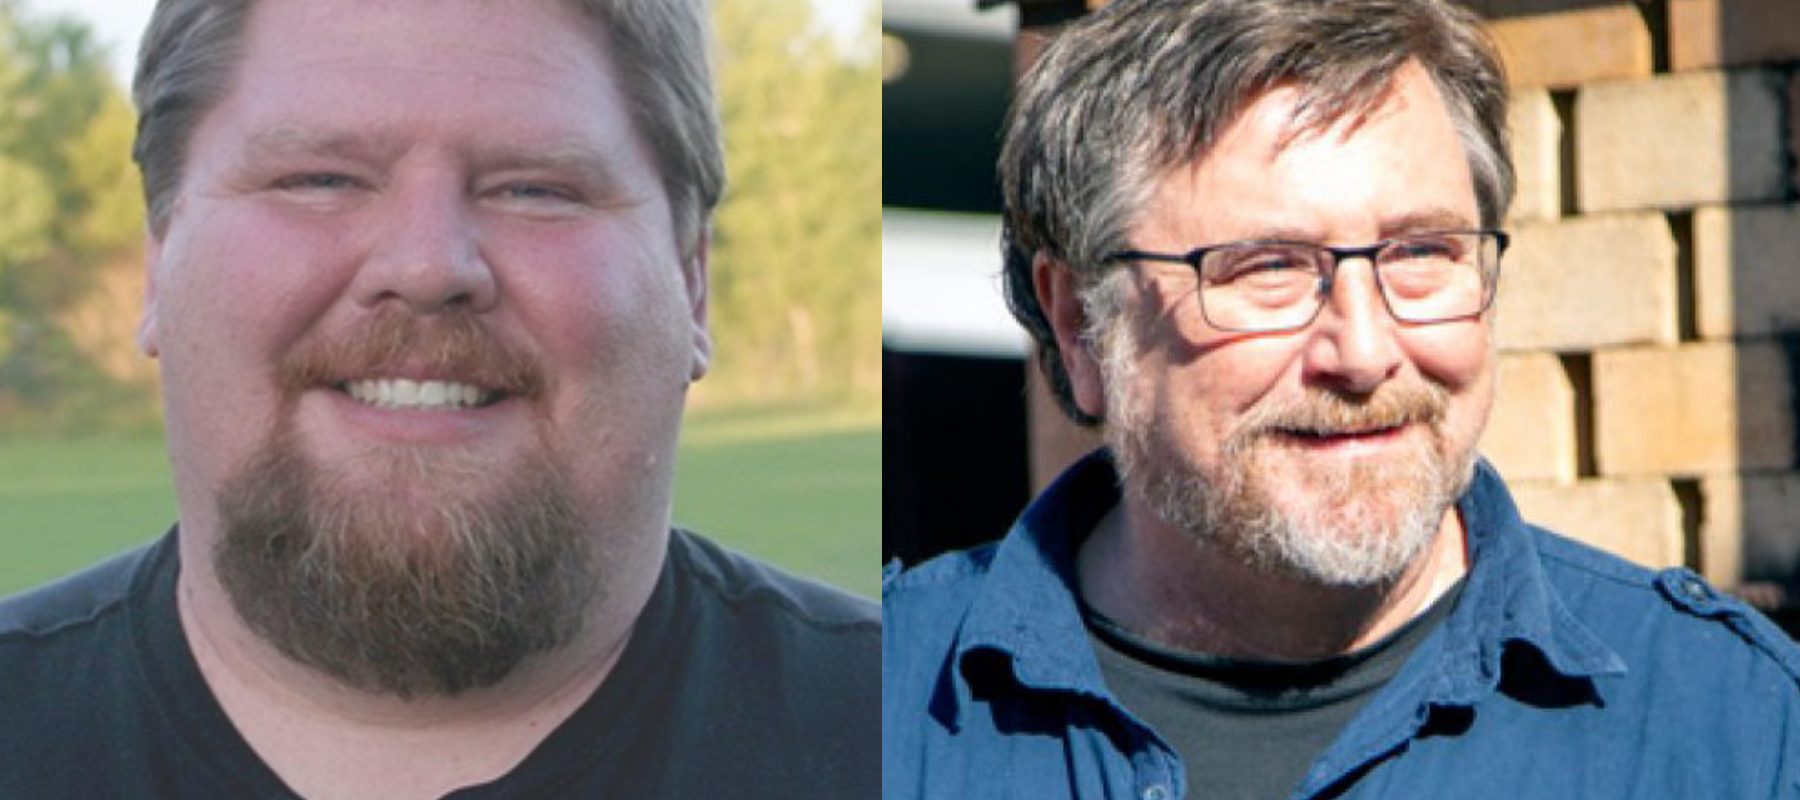 Faculty artists Jeff Pulaski and Barry Badgett will discuss their inspiration and processes.